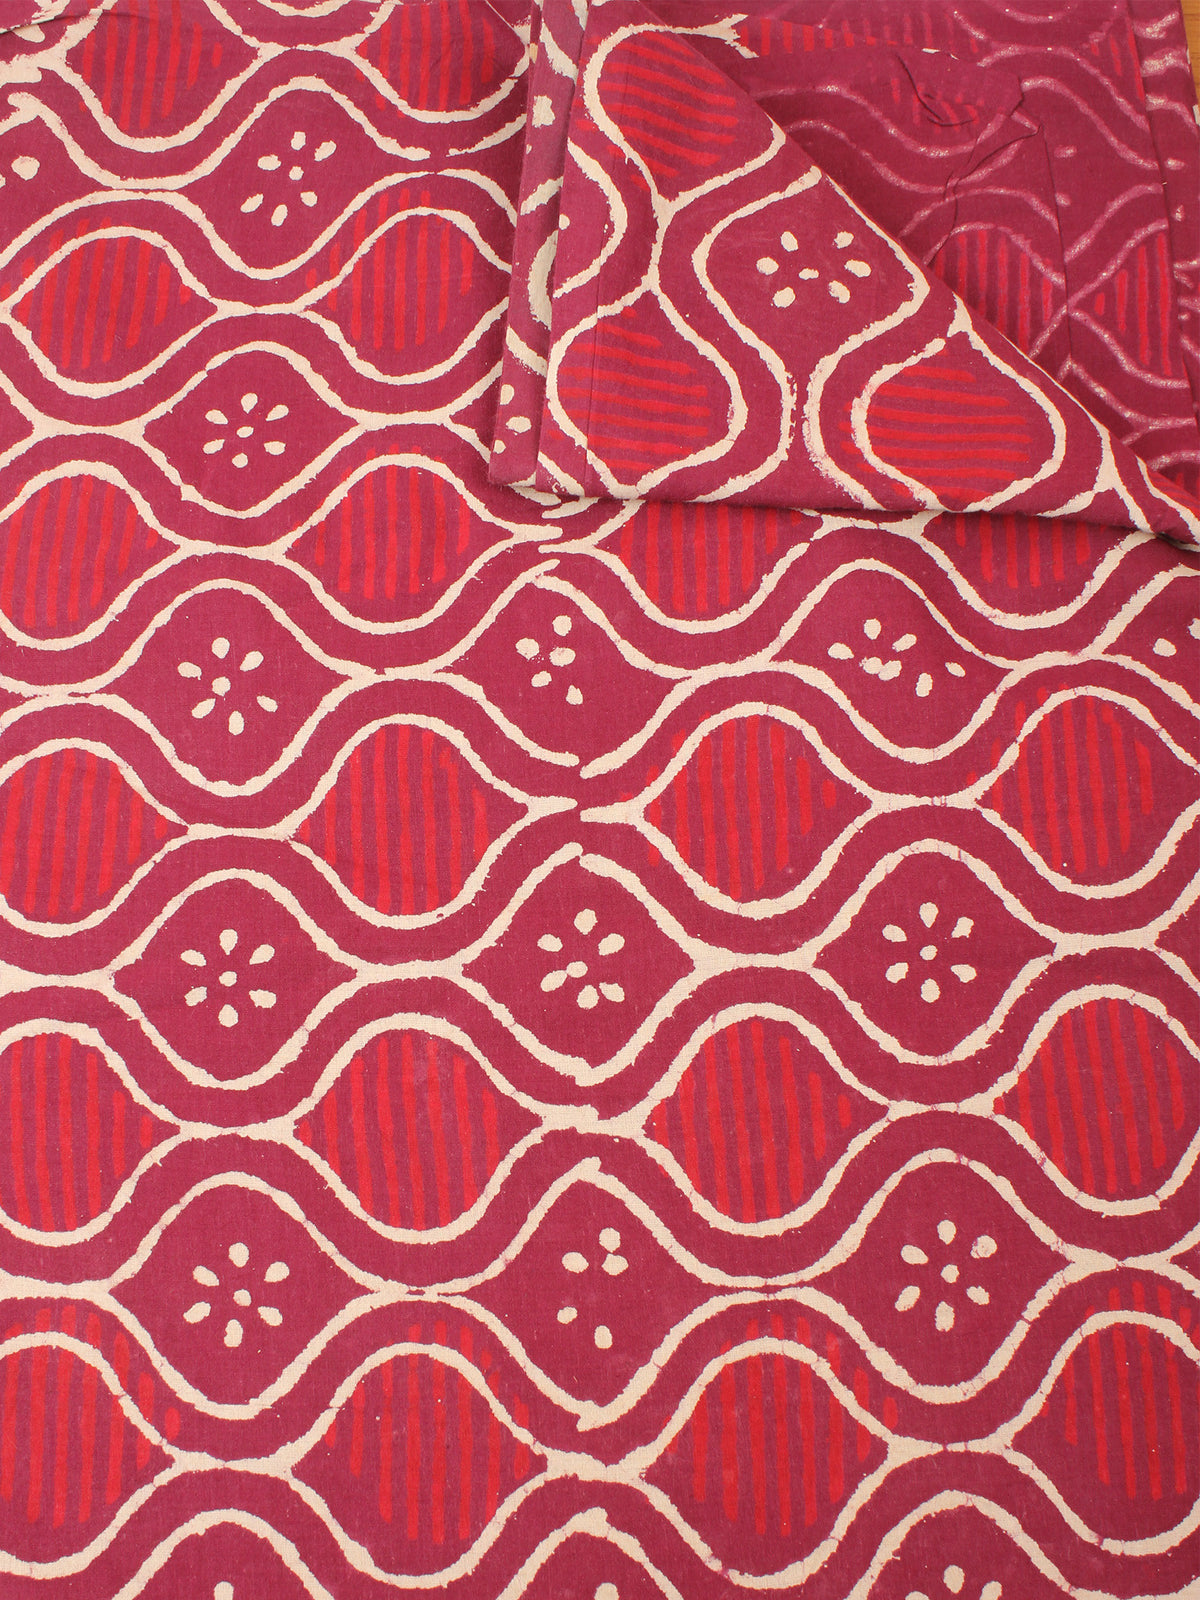 Red Beige Natural Dyed Hand Block Printed Cotton Fabric Per Meter - F0916215